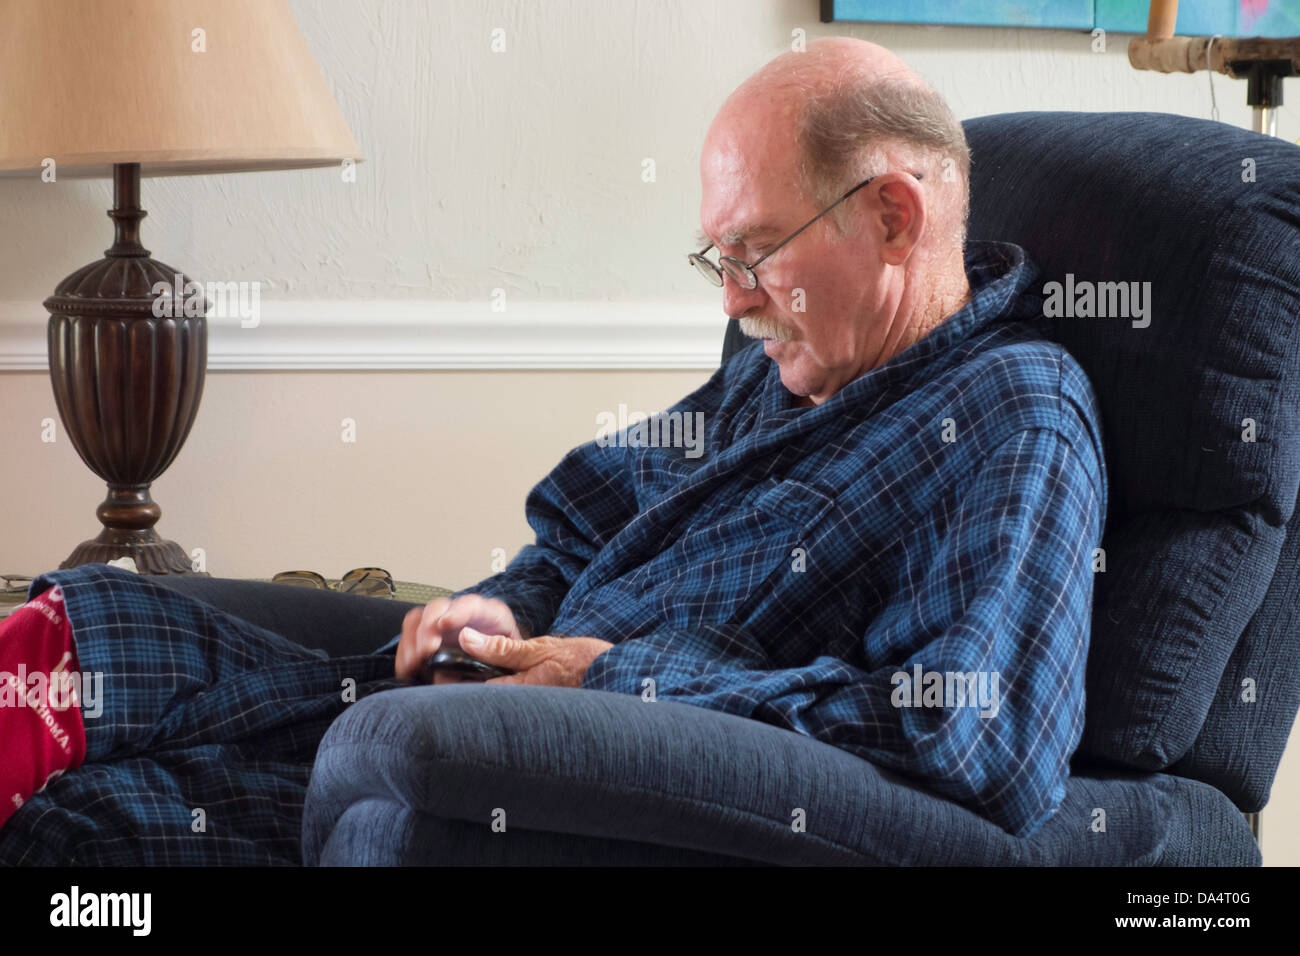 A 75 year old Caucasian man with Alzheimer's struggles with the settings of his cell phone. USA Stock Photo